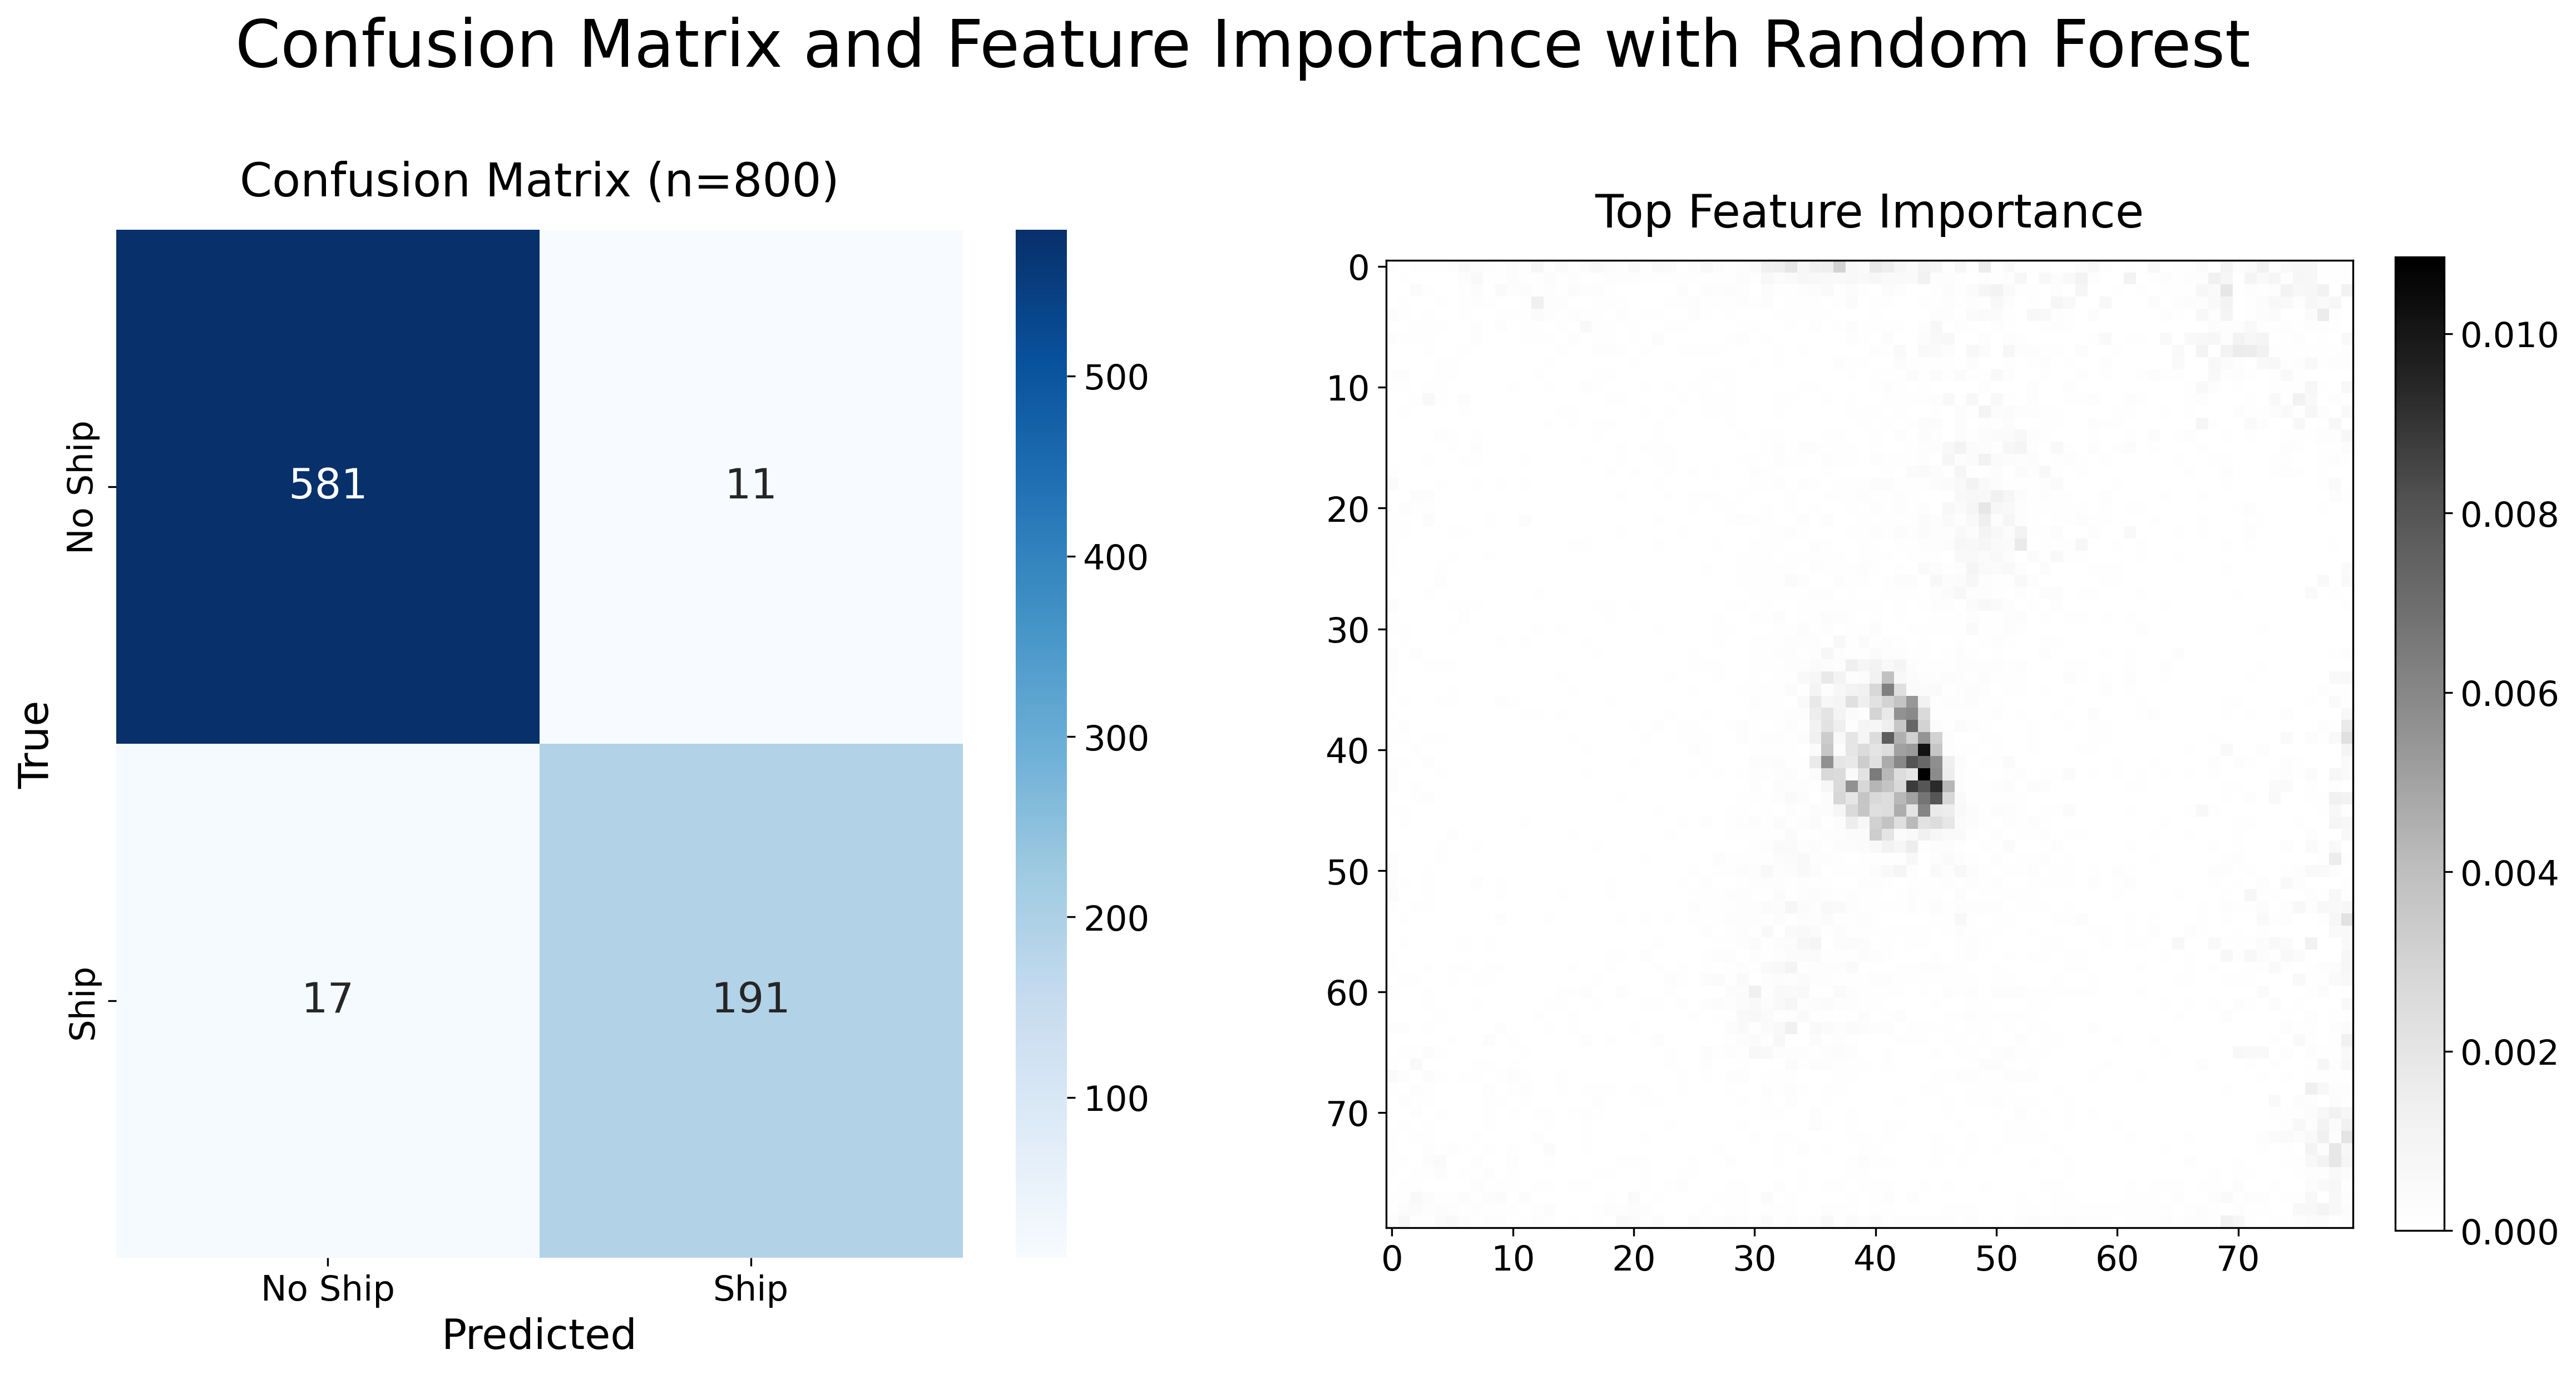 Confusion Matrix and Feature Importance for Random Forest